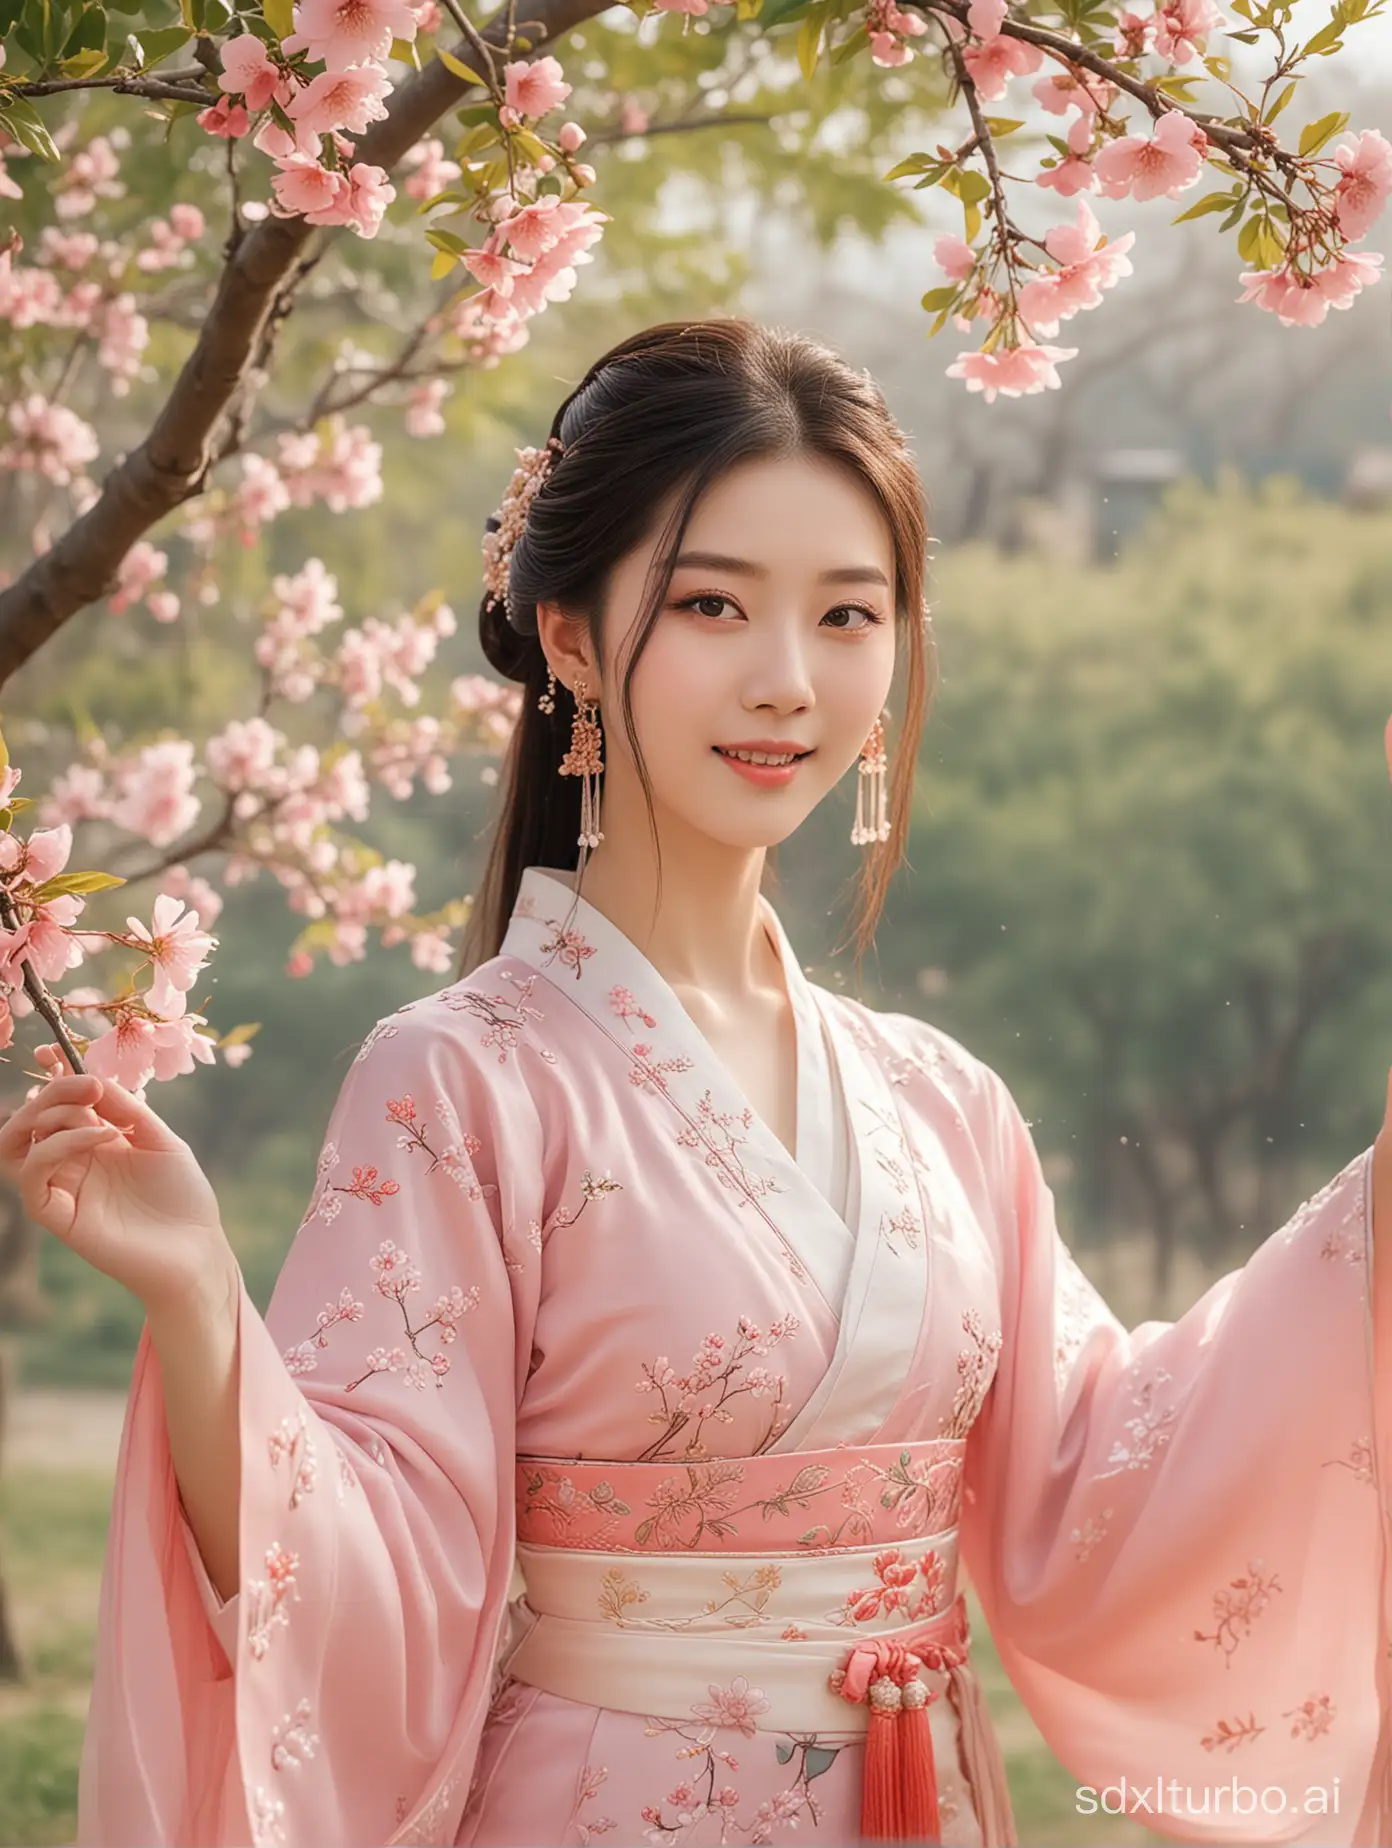 A Chinese girl wearing Hanfu, with a beautiful face, slim figure, exquisite embroidery on Hanfu, exquisite headwear on long hair, standing under a blooming peach tree, smiling at the audience, petals fluttering in the wind, soft natural light, spring atmosphere, and full body photography